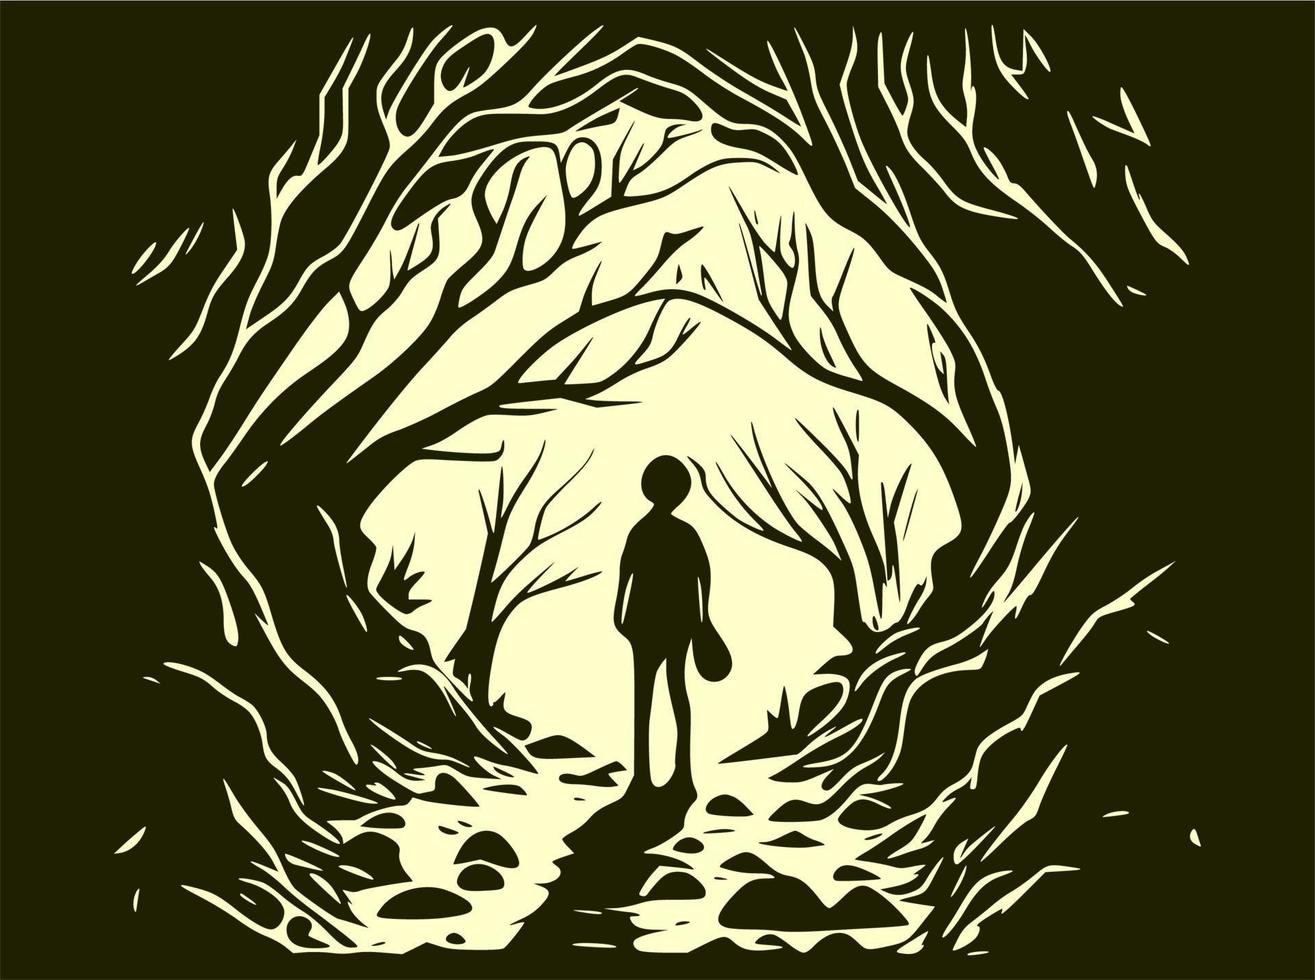 Mysterious forest background, for halloween. vector